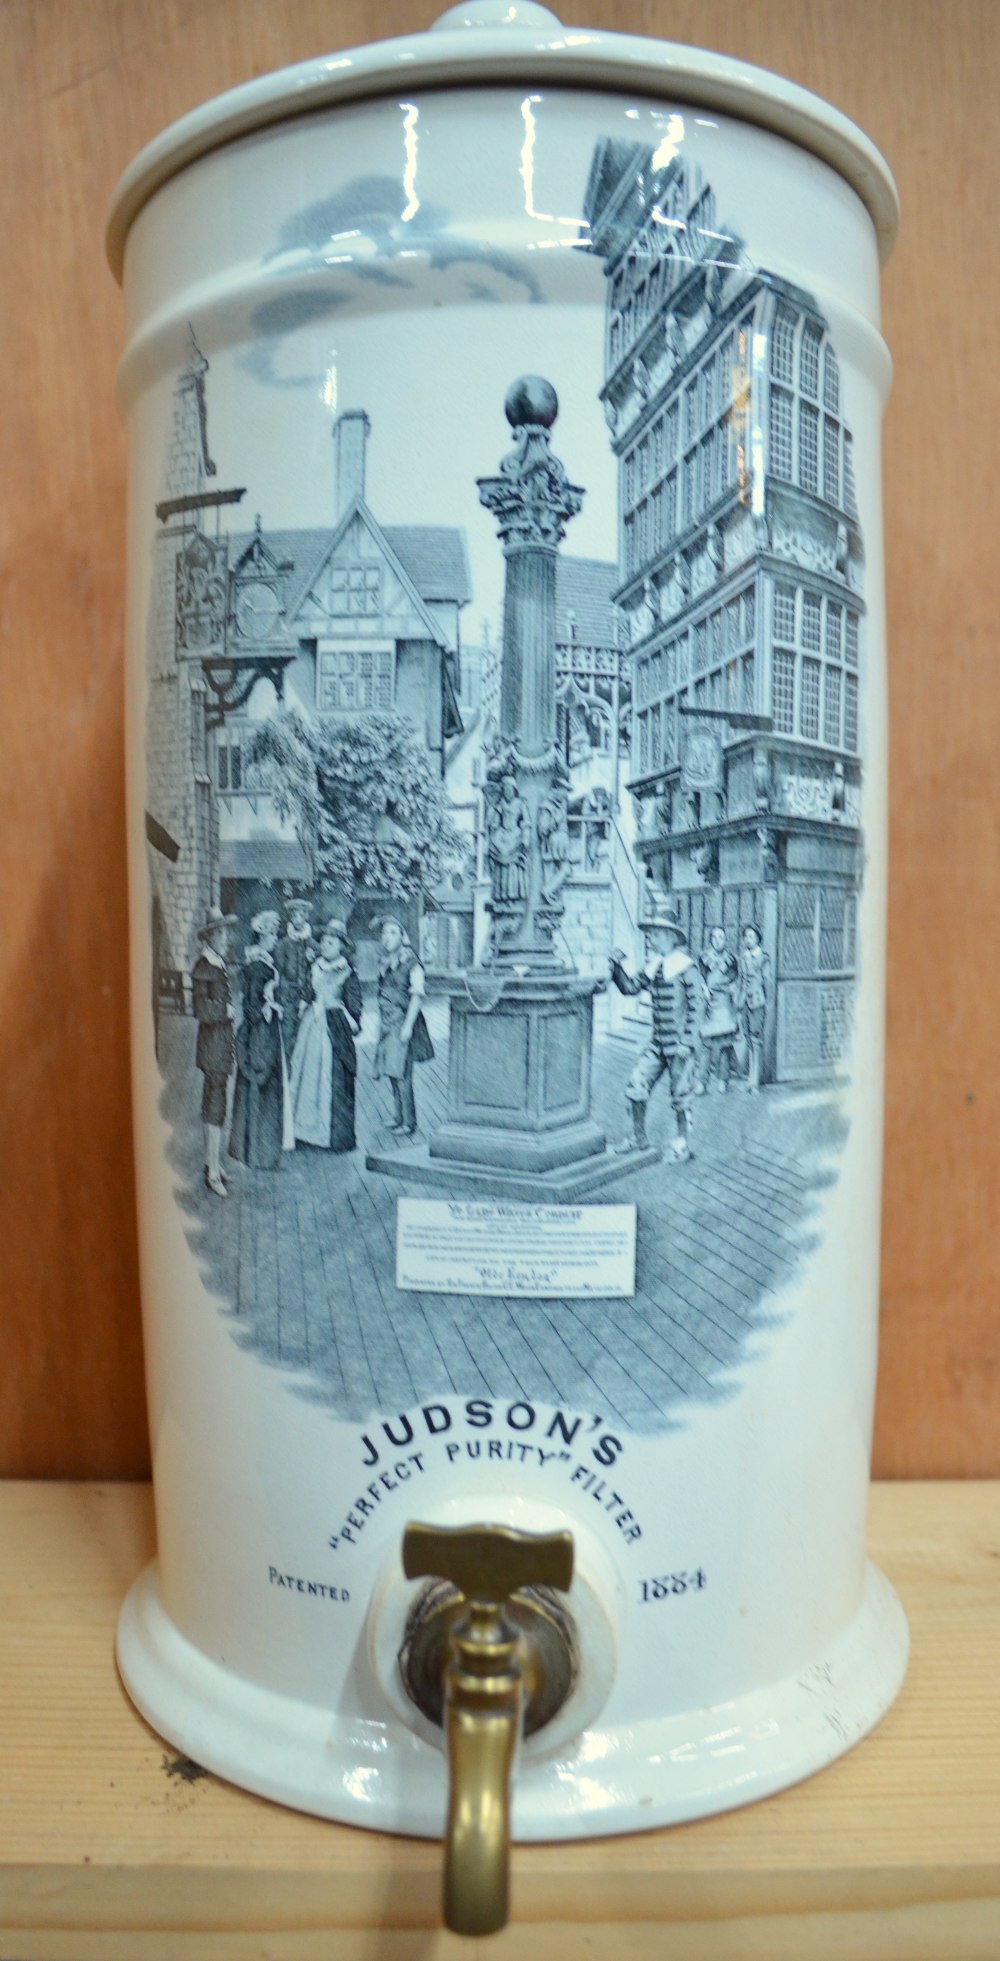 Judson's 'Perfect Purity' water filter, patented 1884, - Image 2 of 4